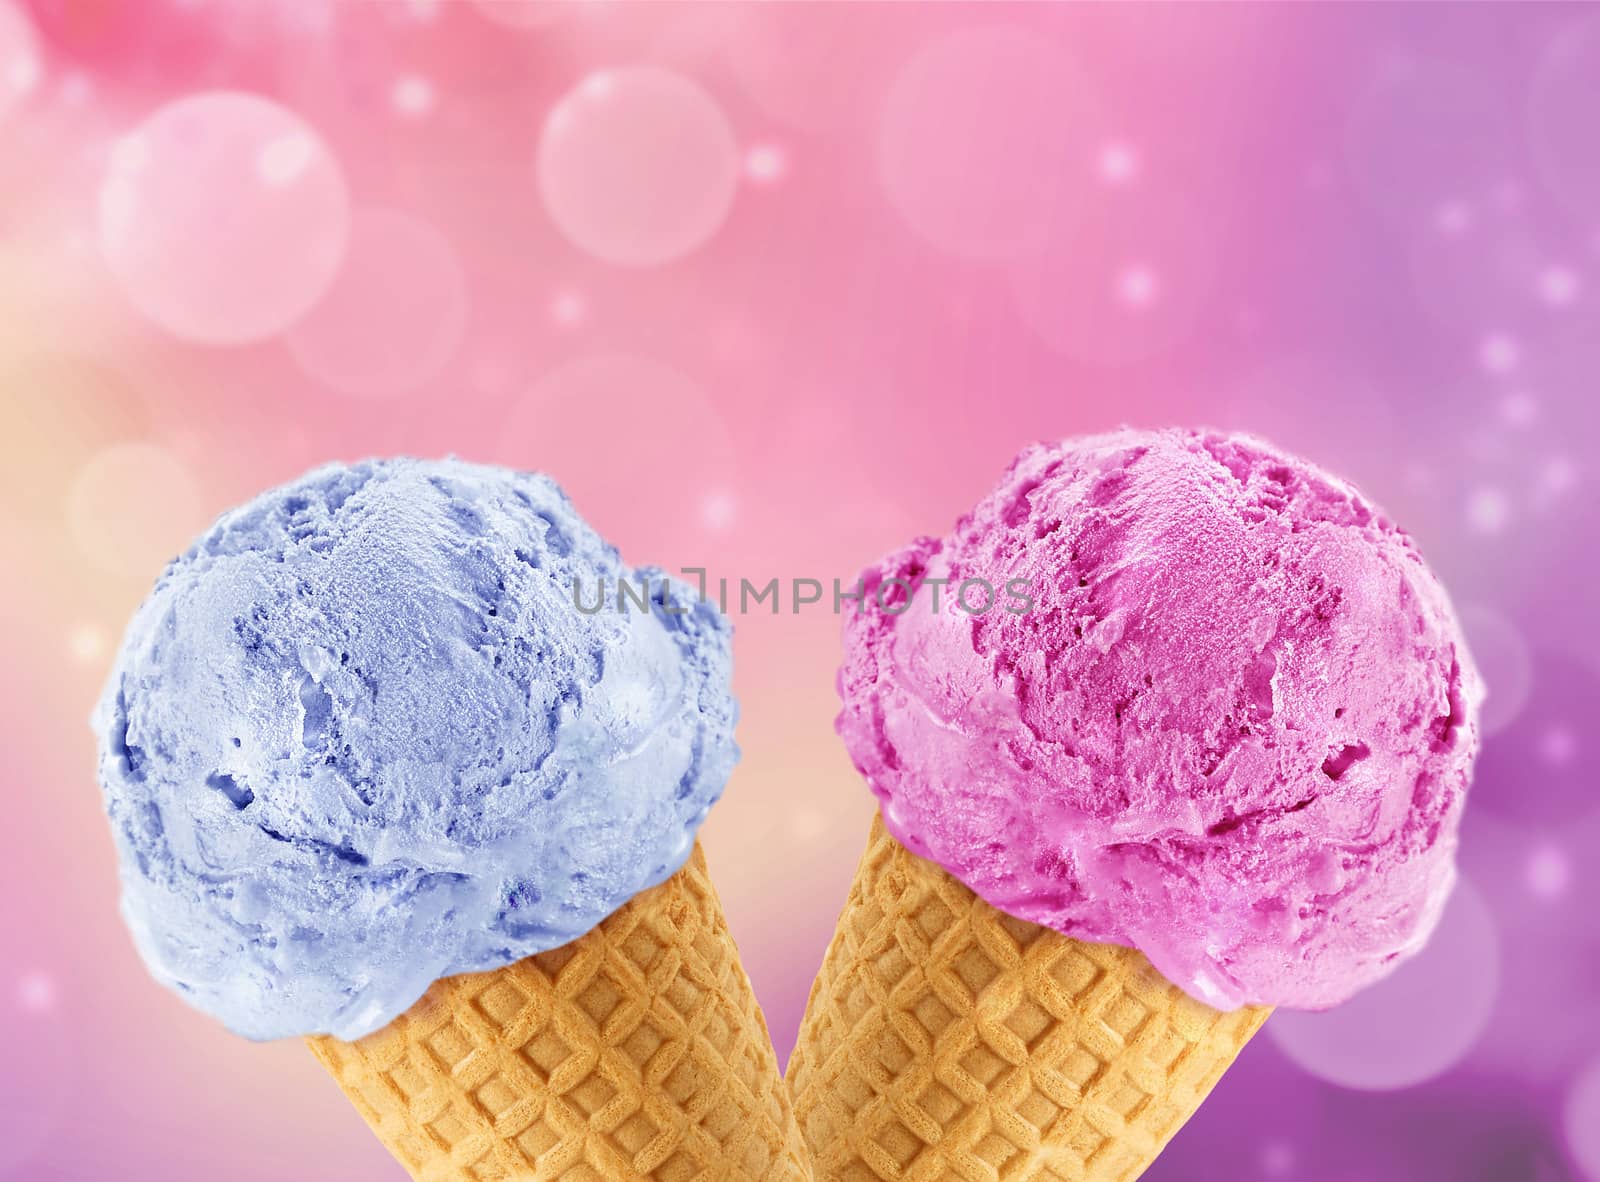 Blue and Pinkberry Ice cream in the cone with abstract light background.